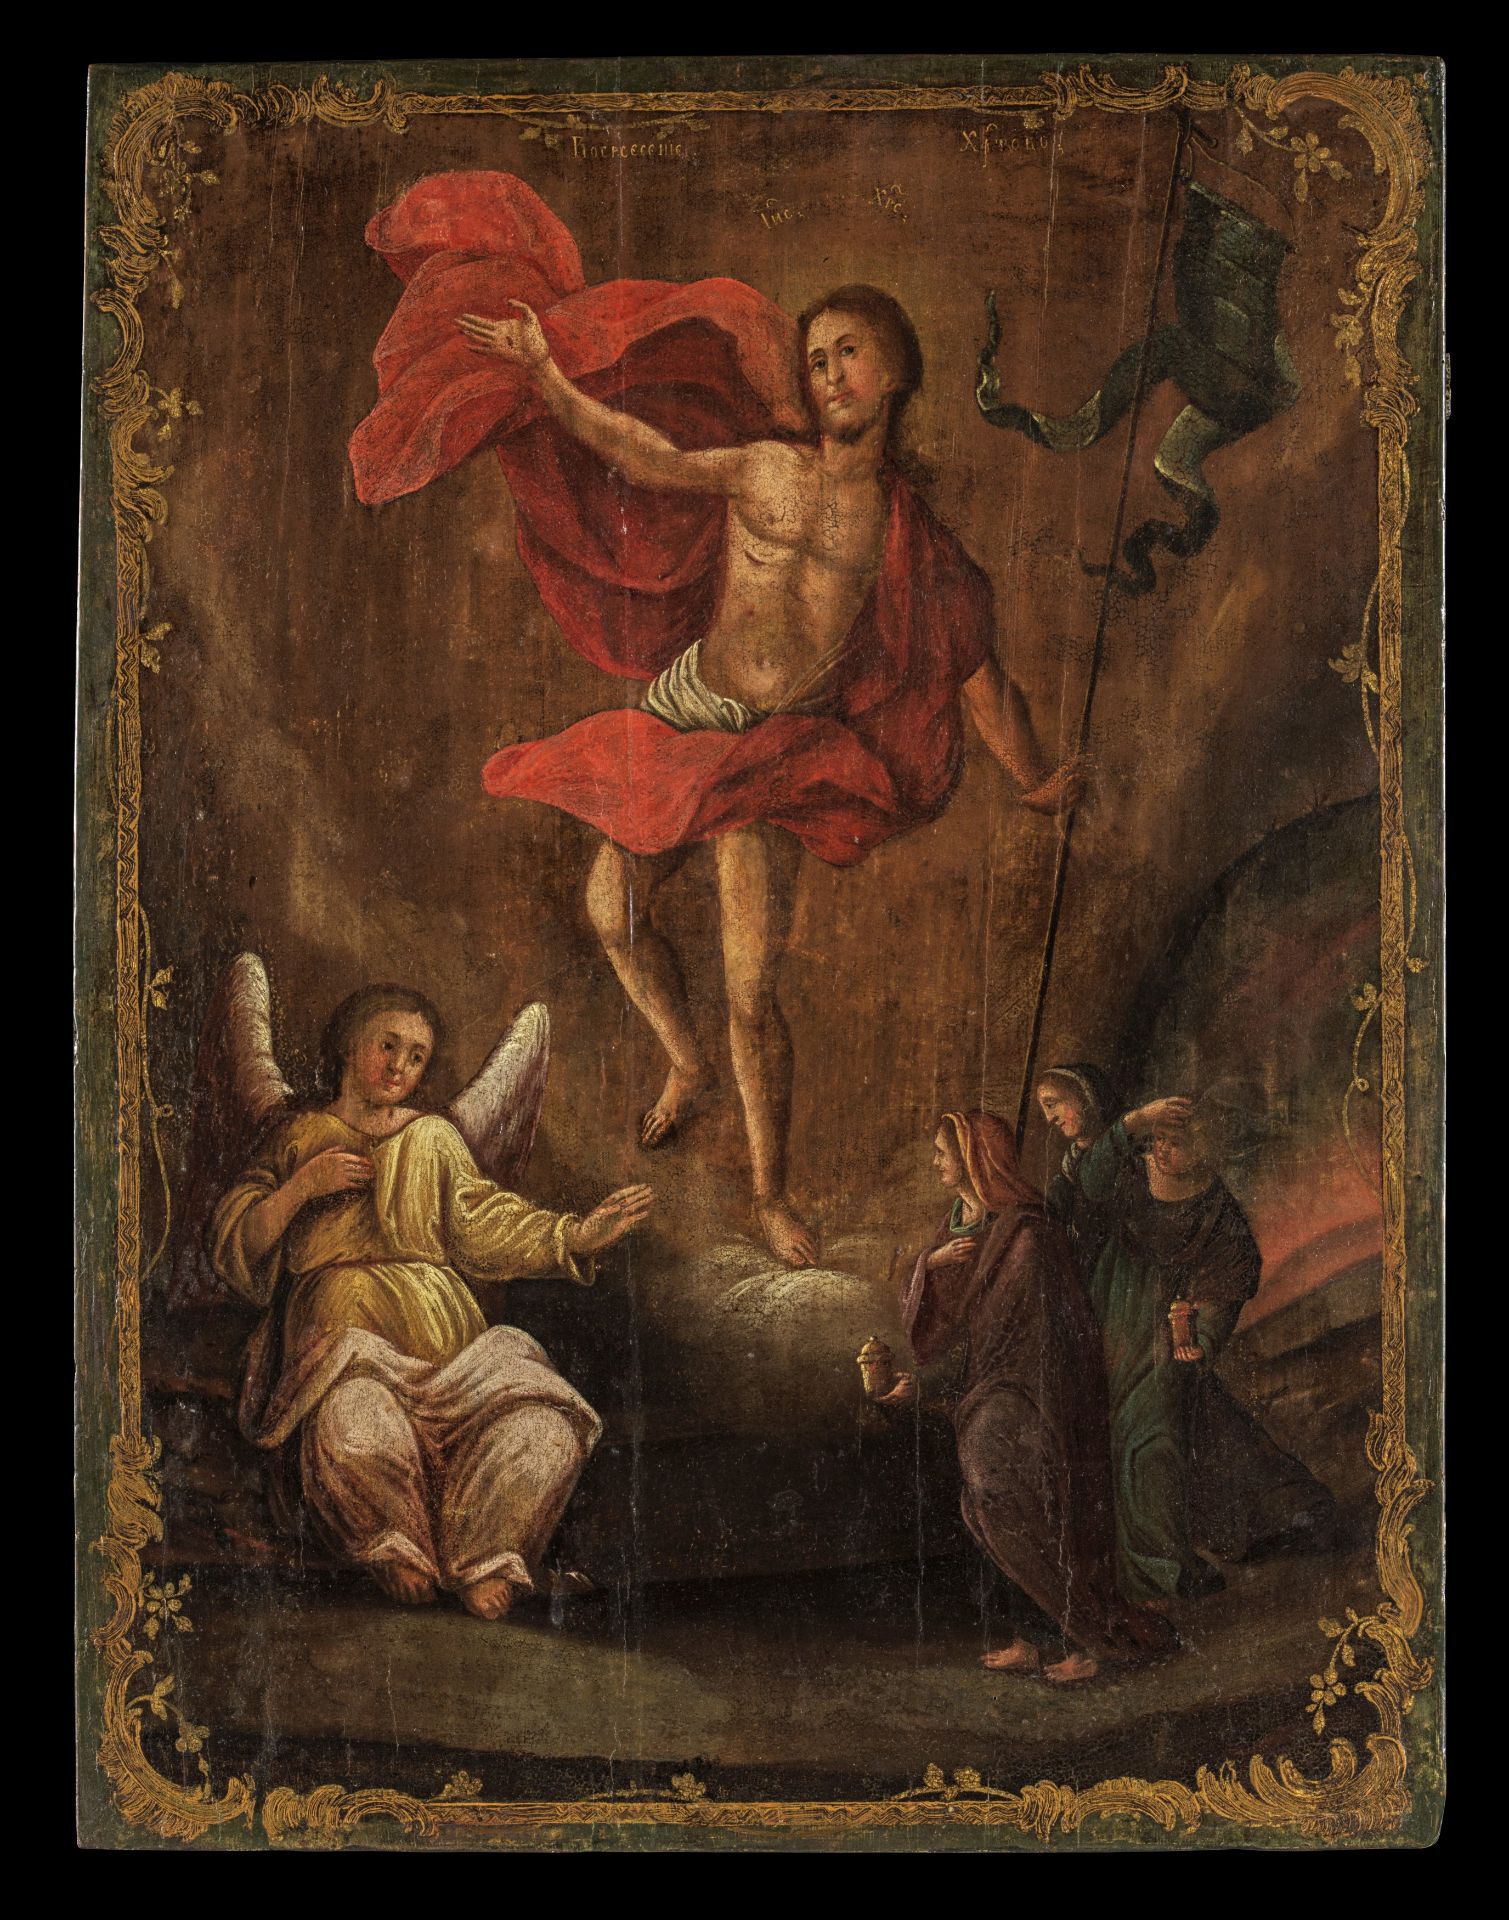 Large Icon showing the Resurrection of Christ.